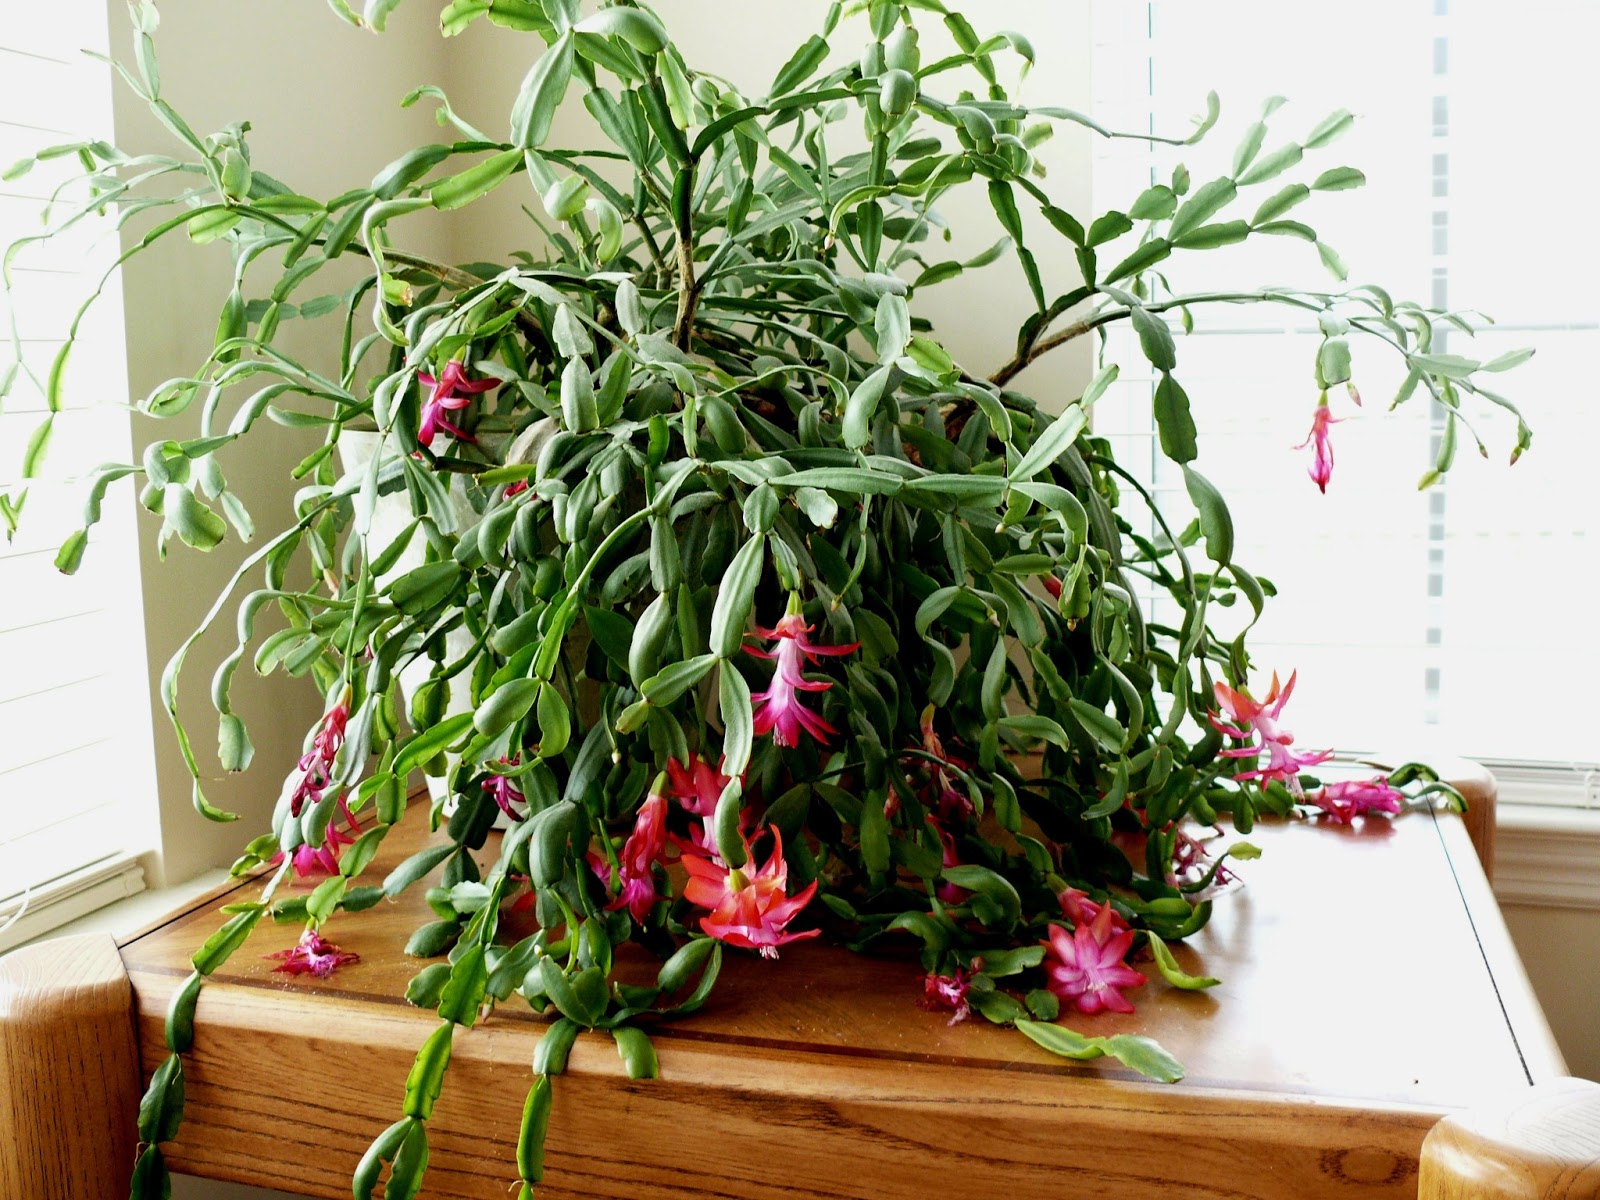 Travels and Discoveries: The Easter Cactus